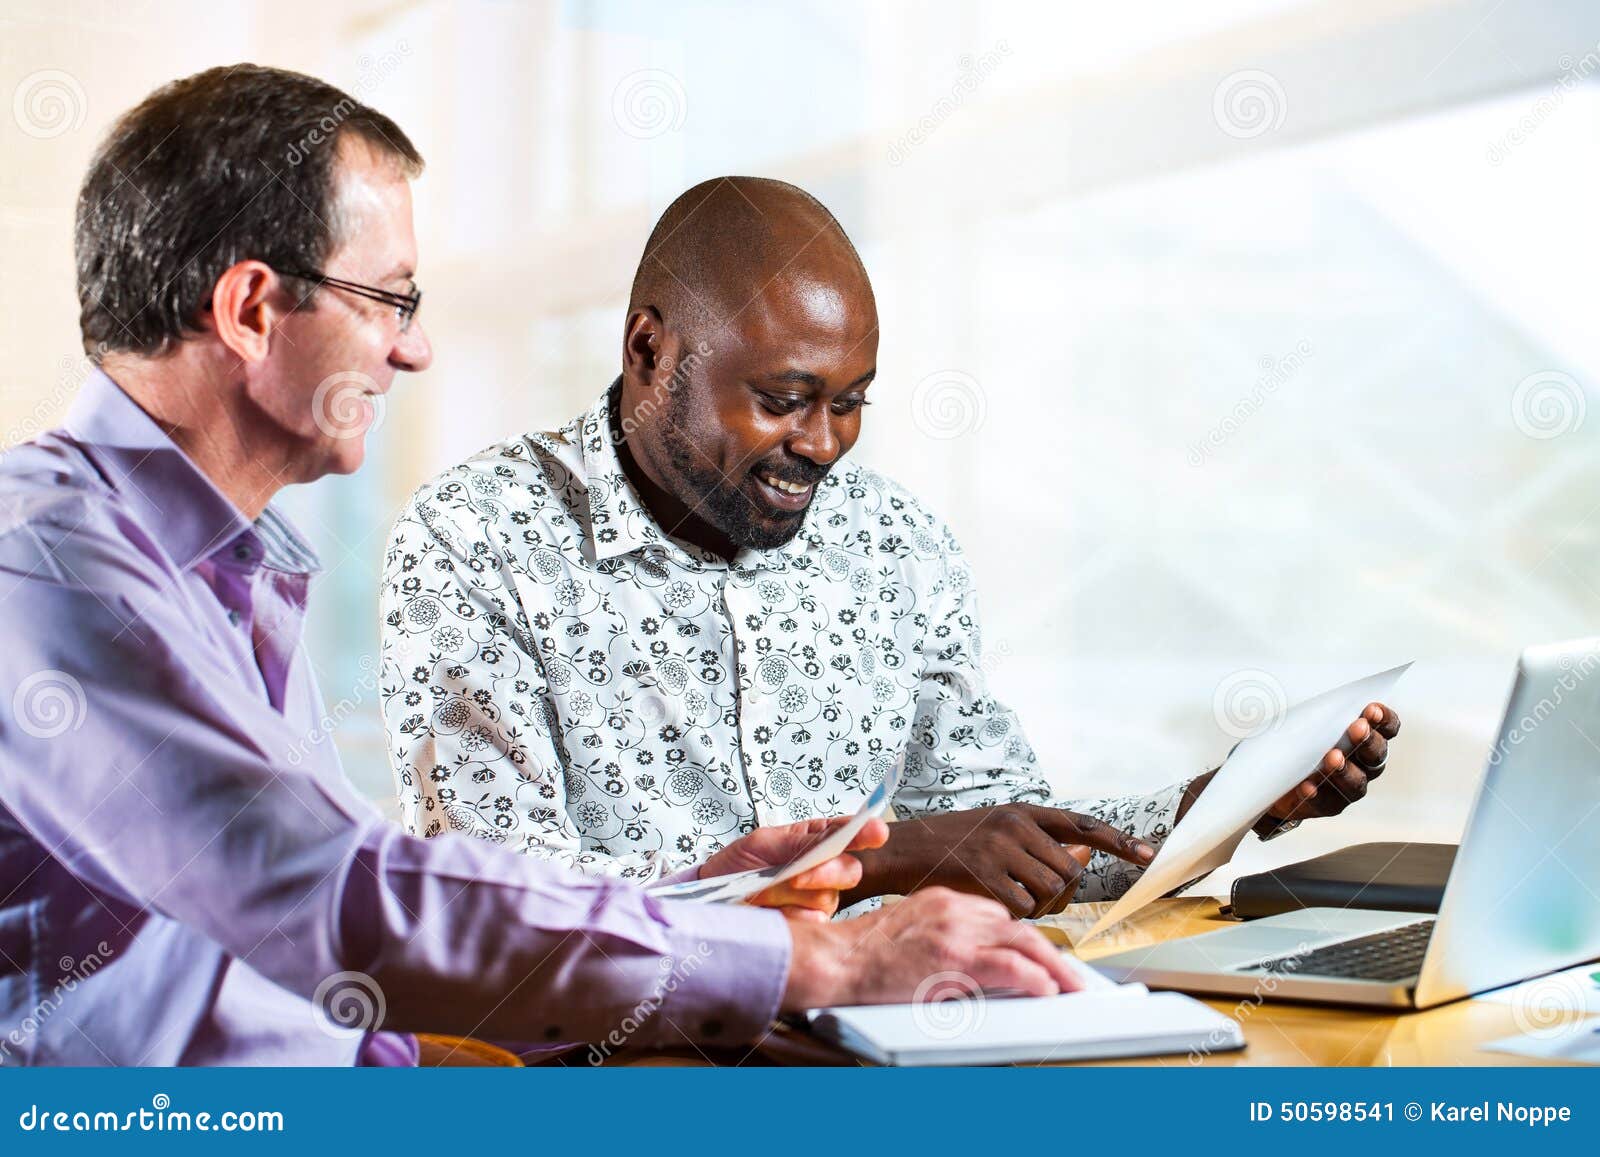 Diverse Business Partners Working Together. Stock Image - Image of ...